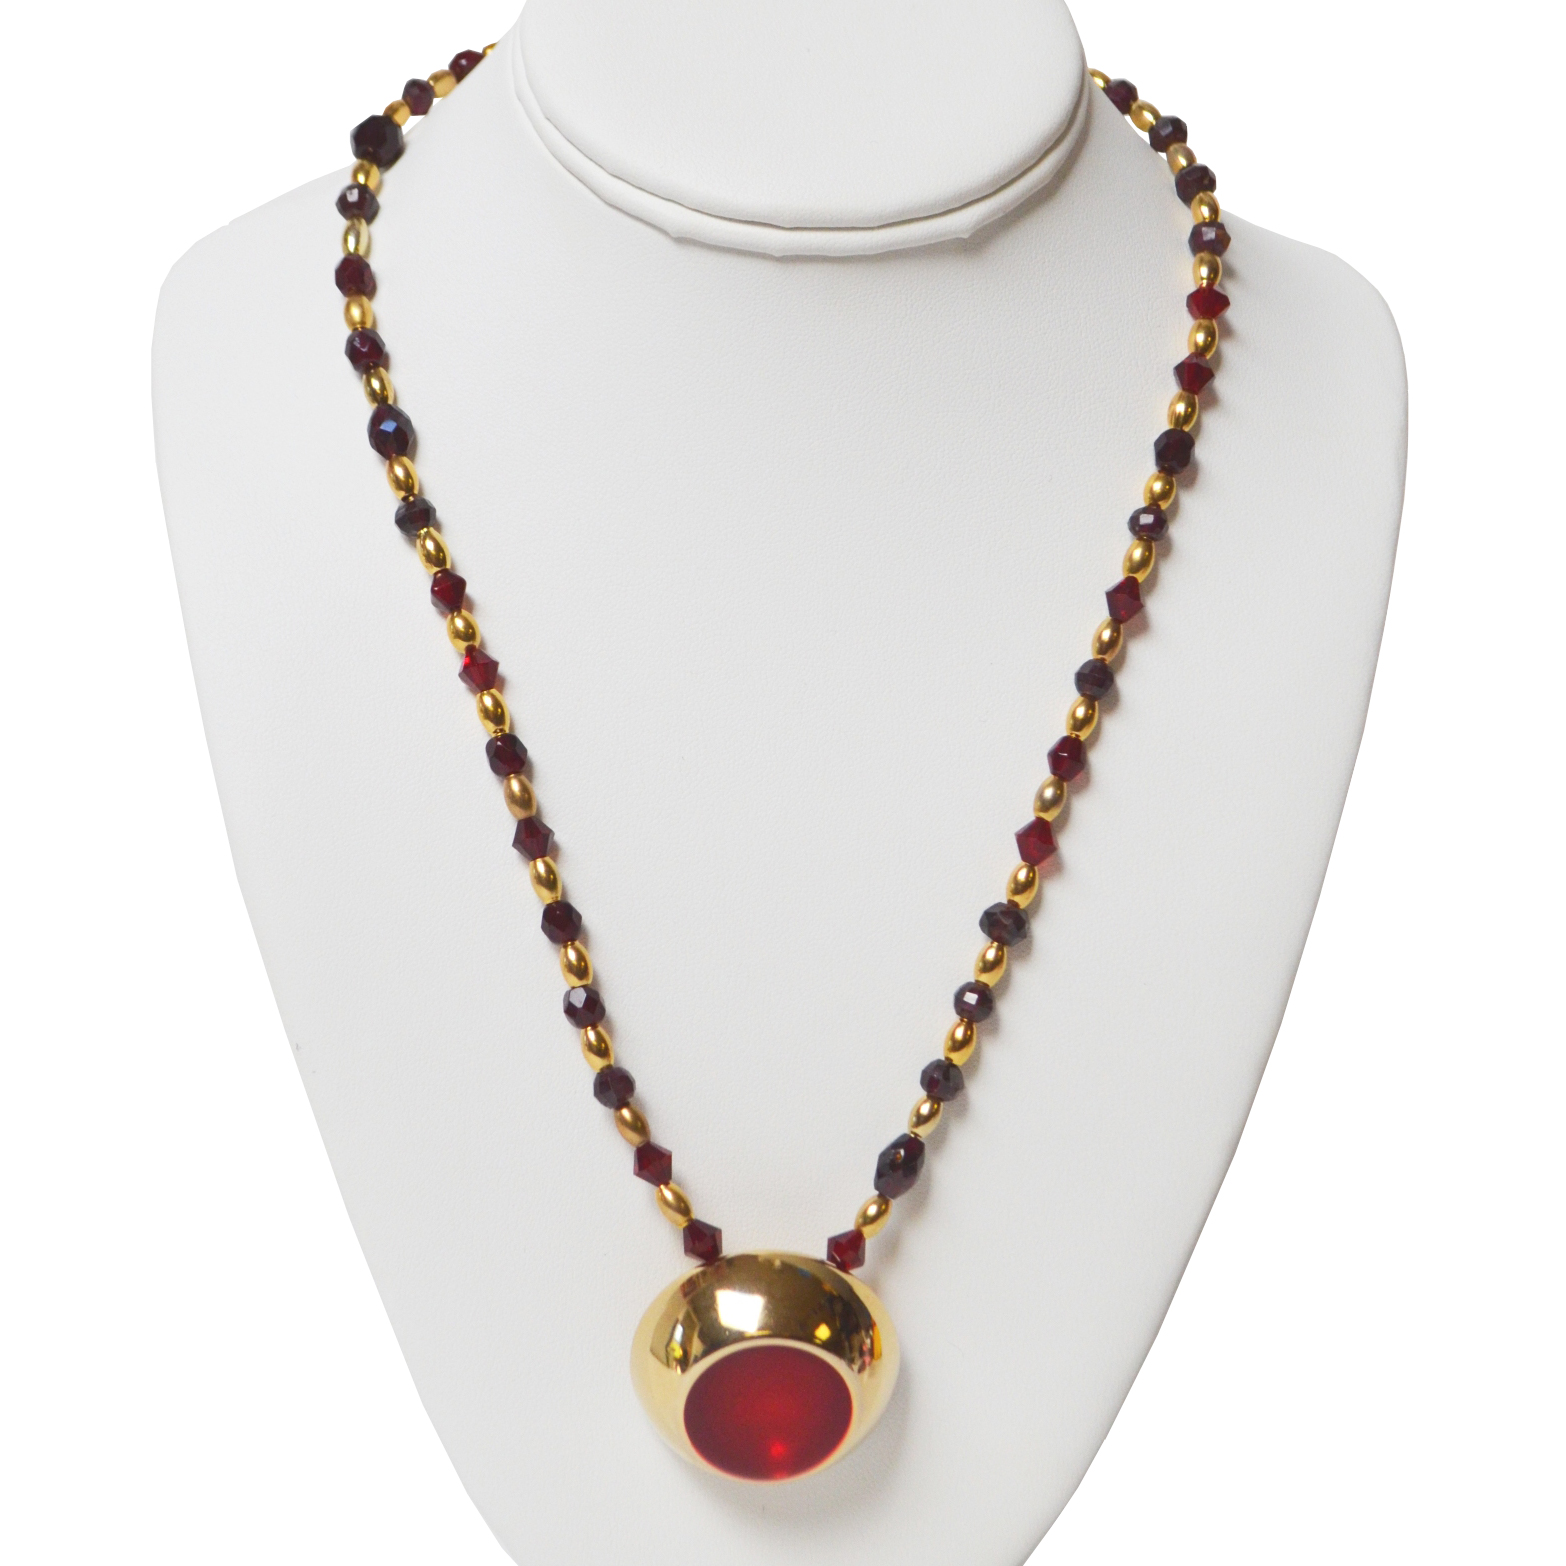 Laser red pendant necklace by Michael Natale